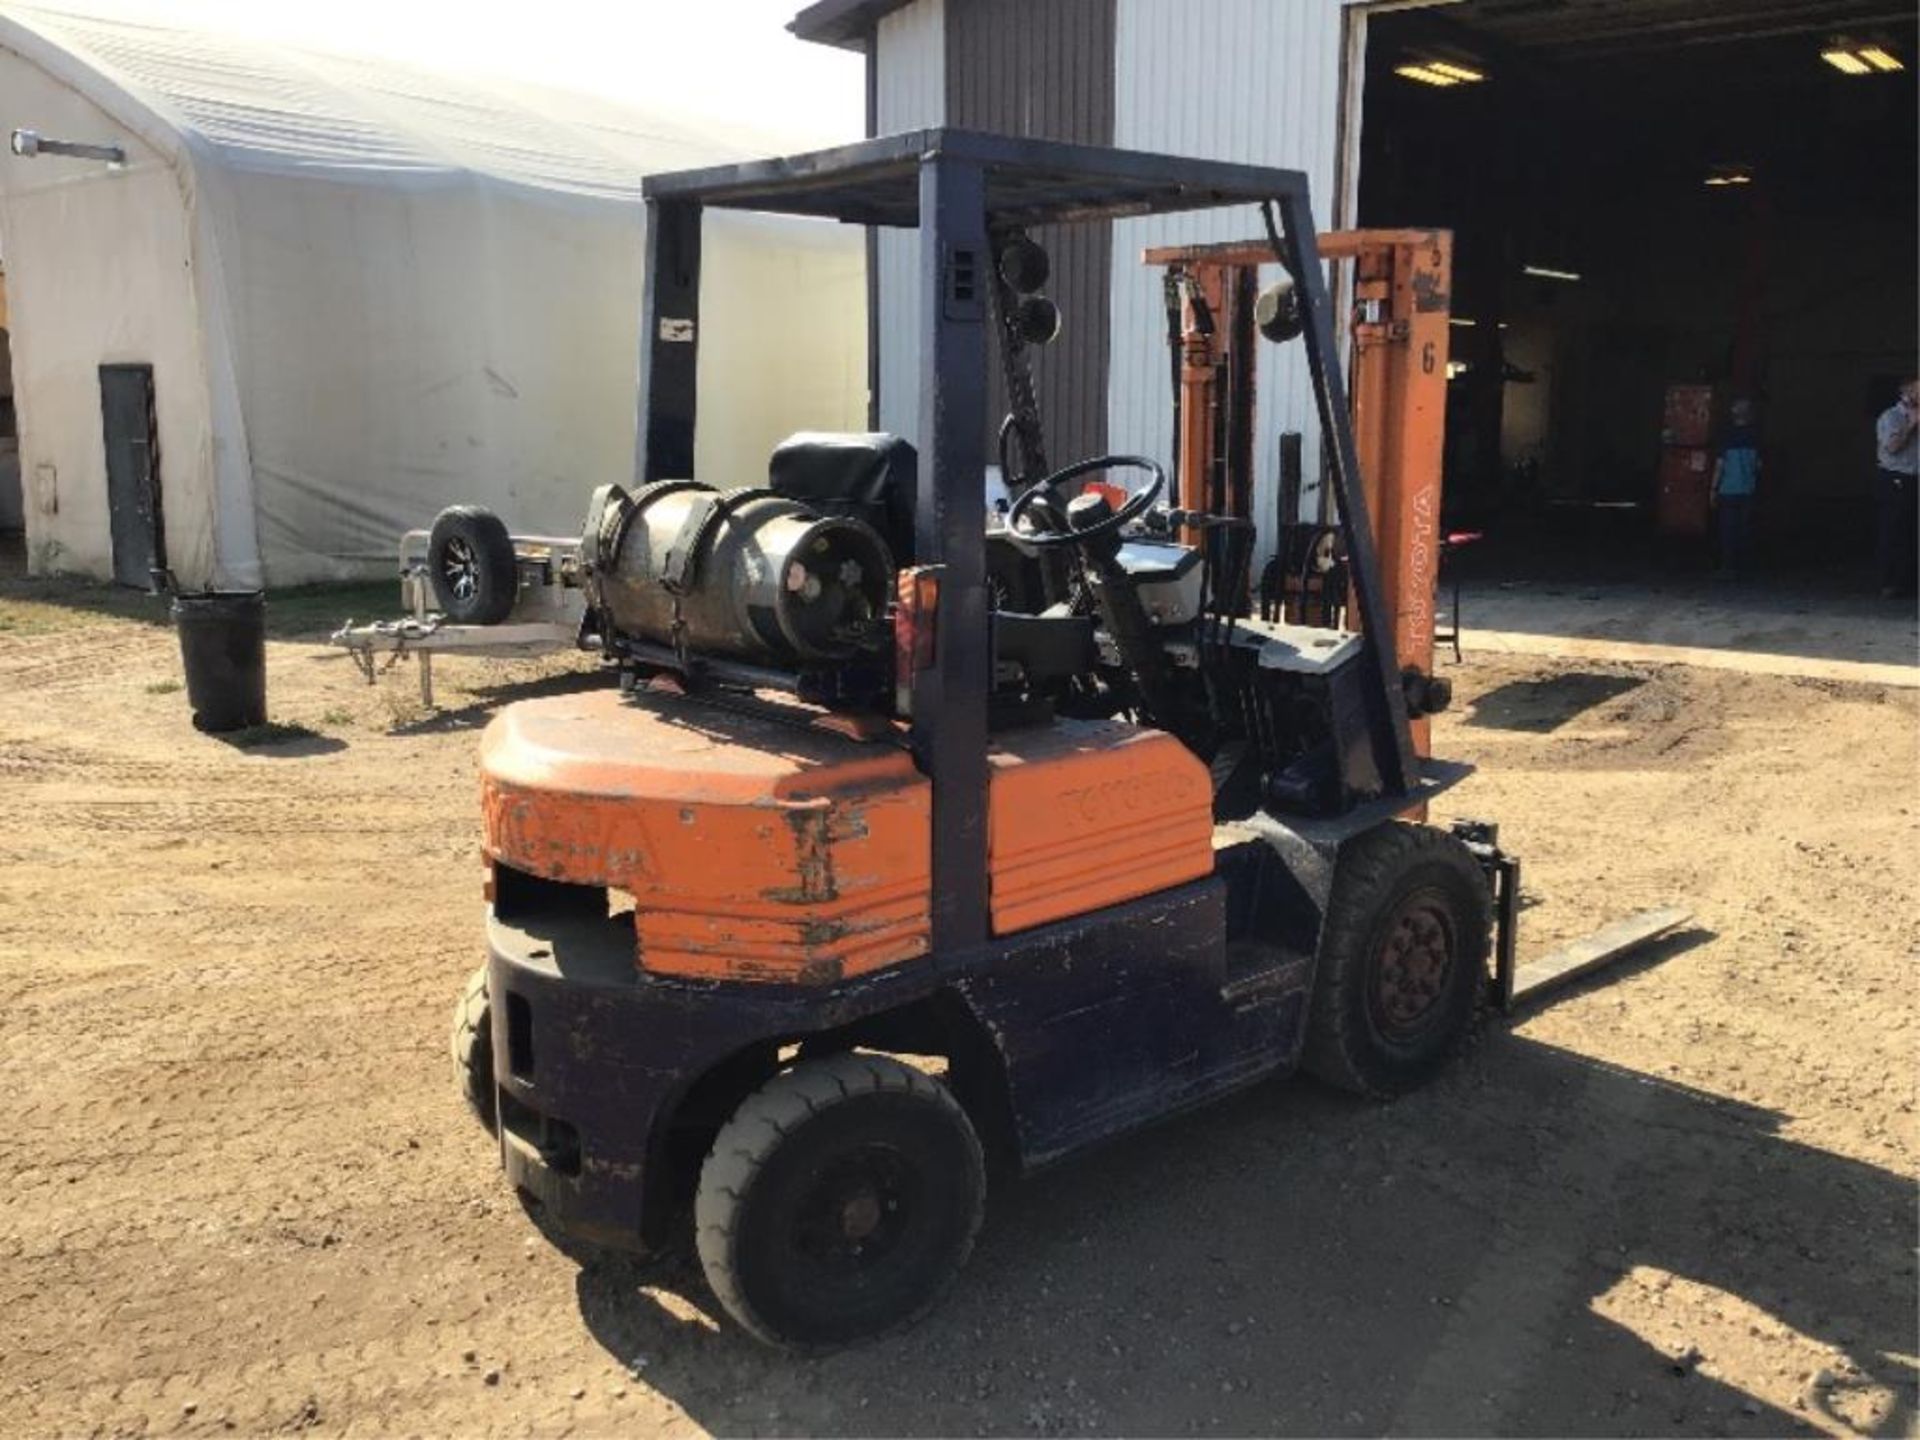 Toyota G25 Propane/Gas Powered Forlift 10ft Lift S/N 405FG25-61786. Possession of this Unit is Mond - Image 3 of 10